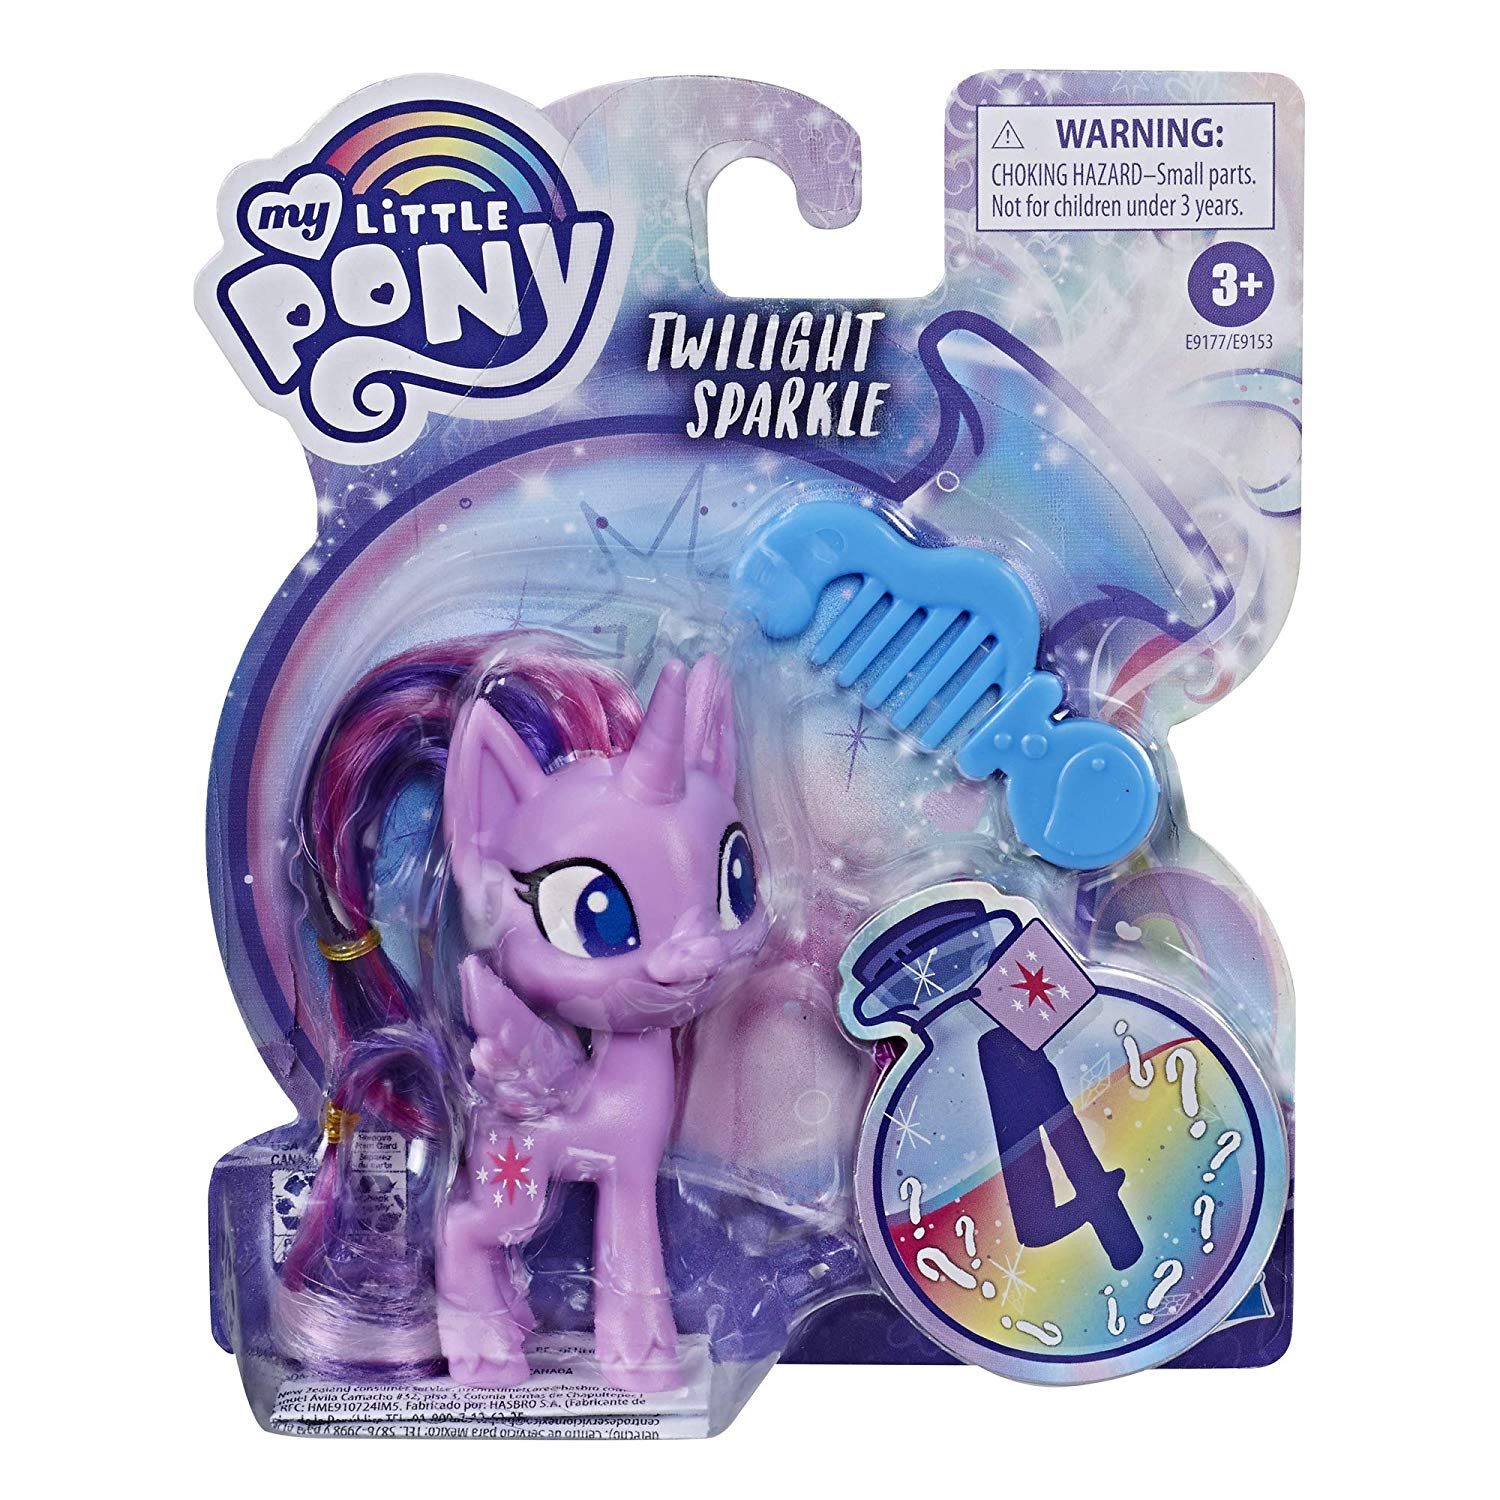 Amazon Listed My Little Pony Figures In New Design Including New